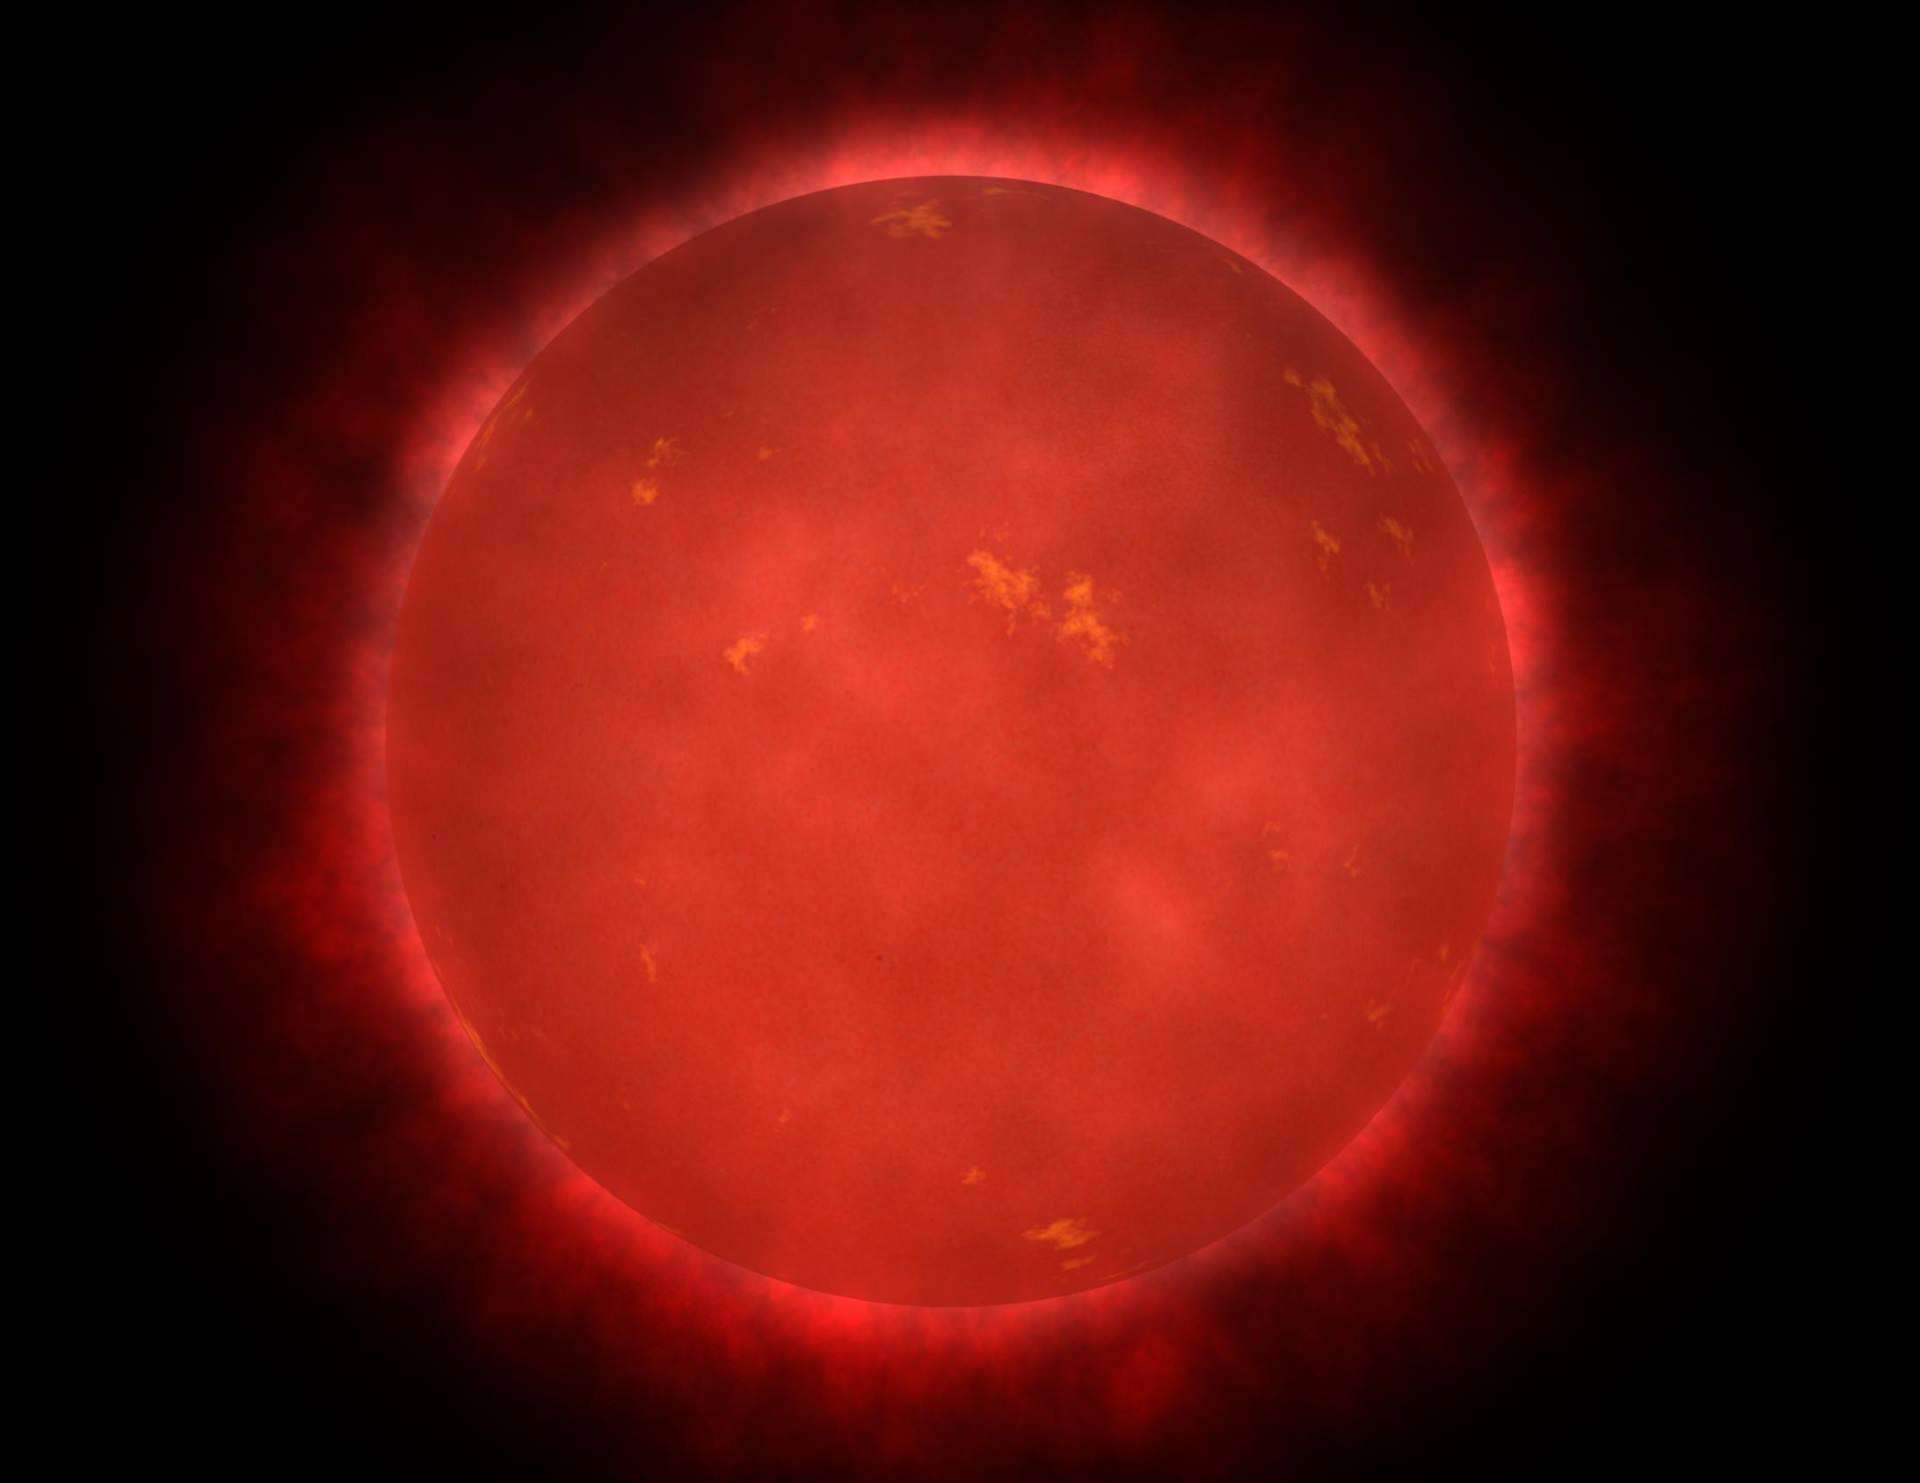 serial code for universe red giant